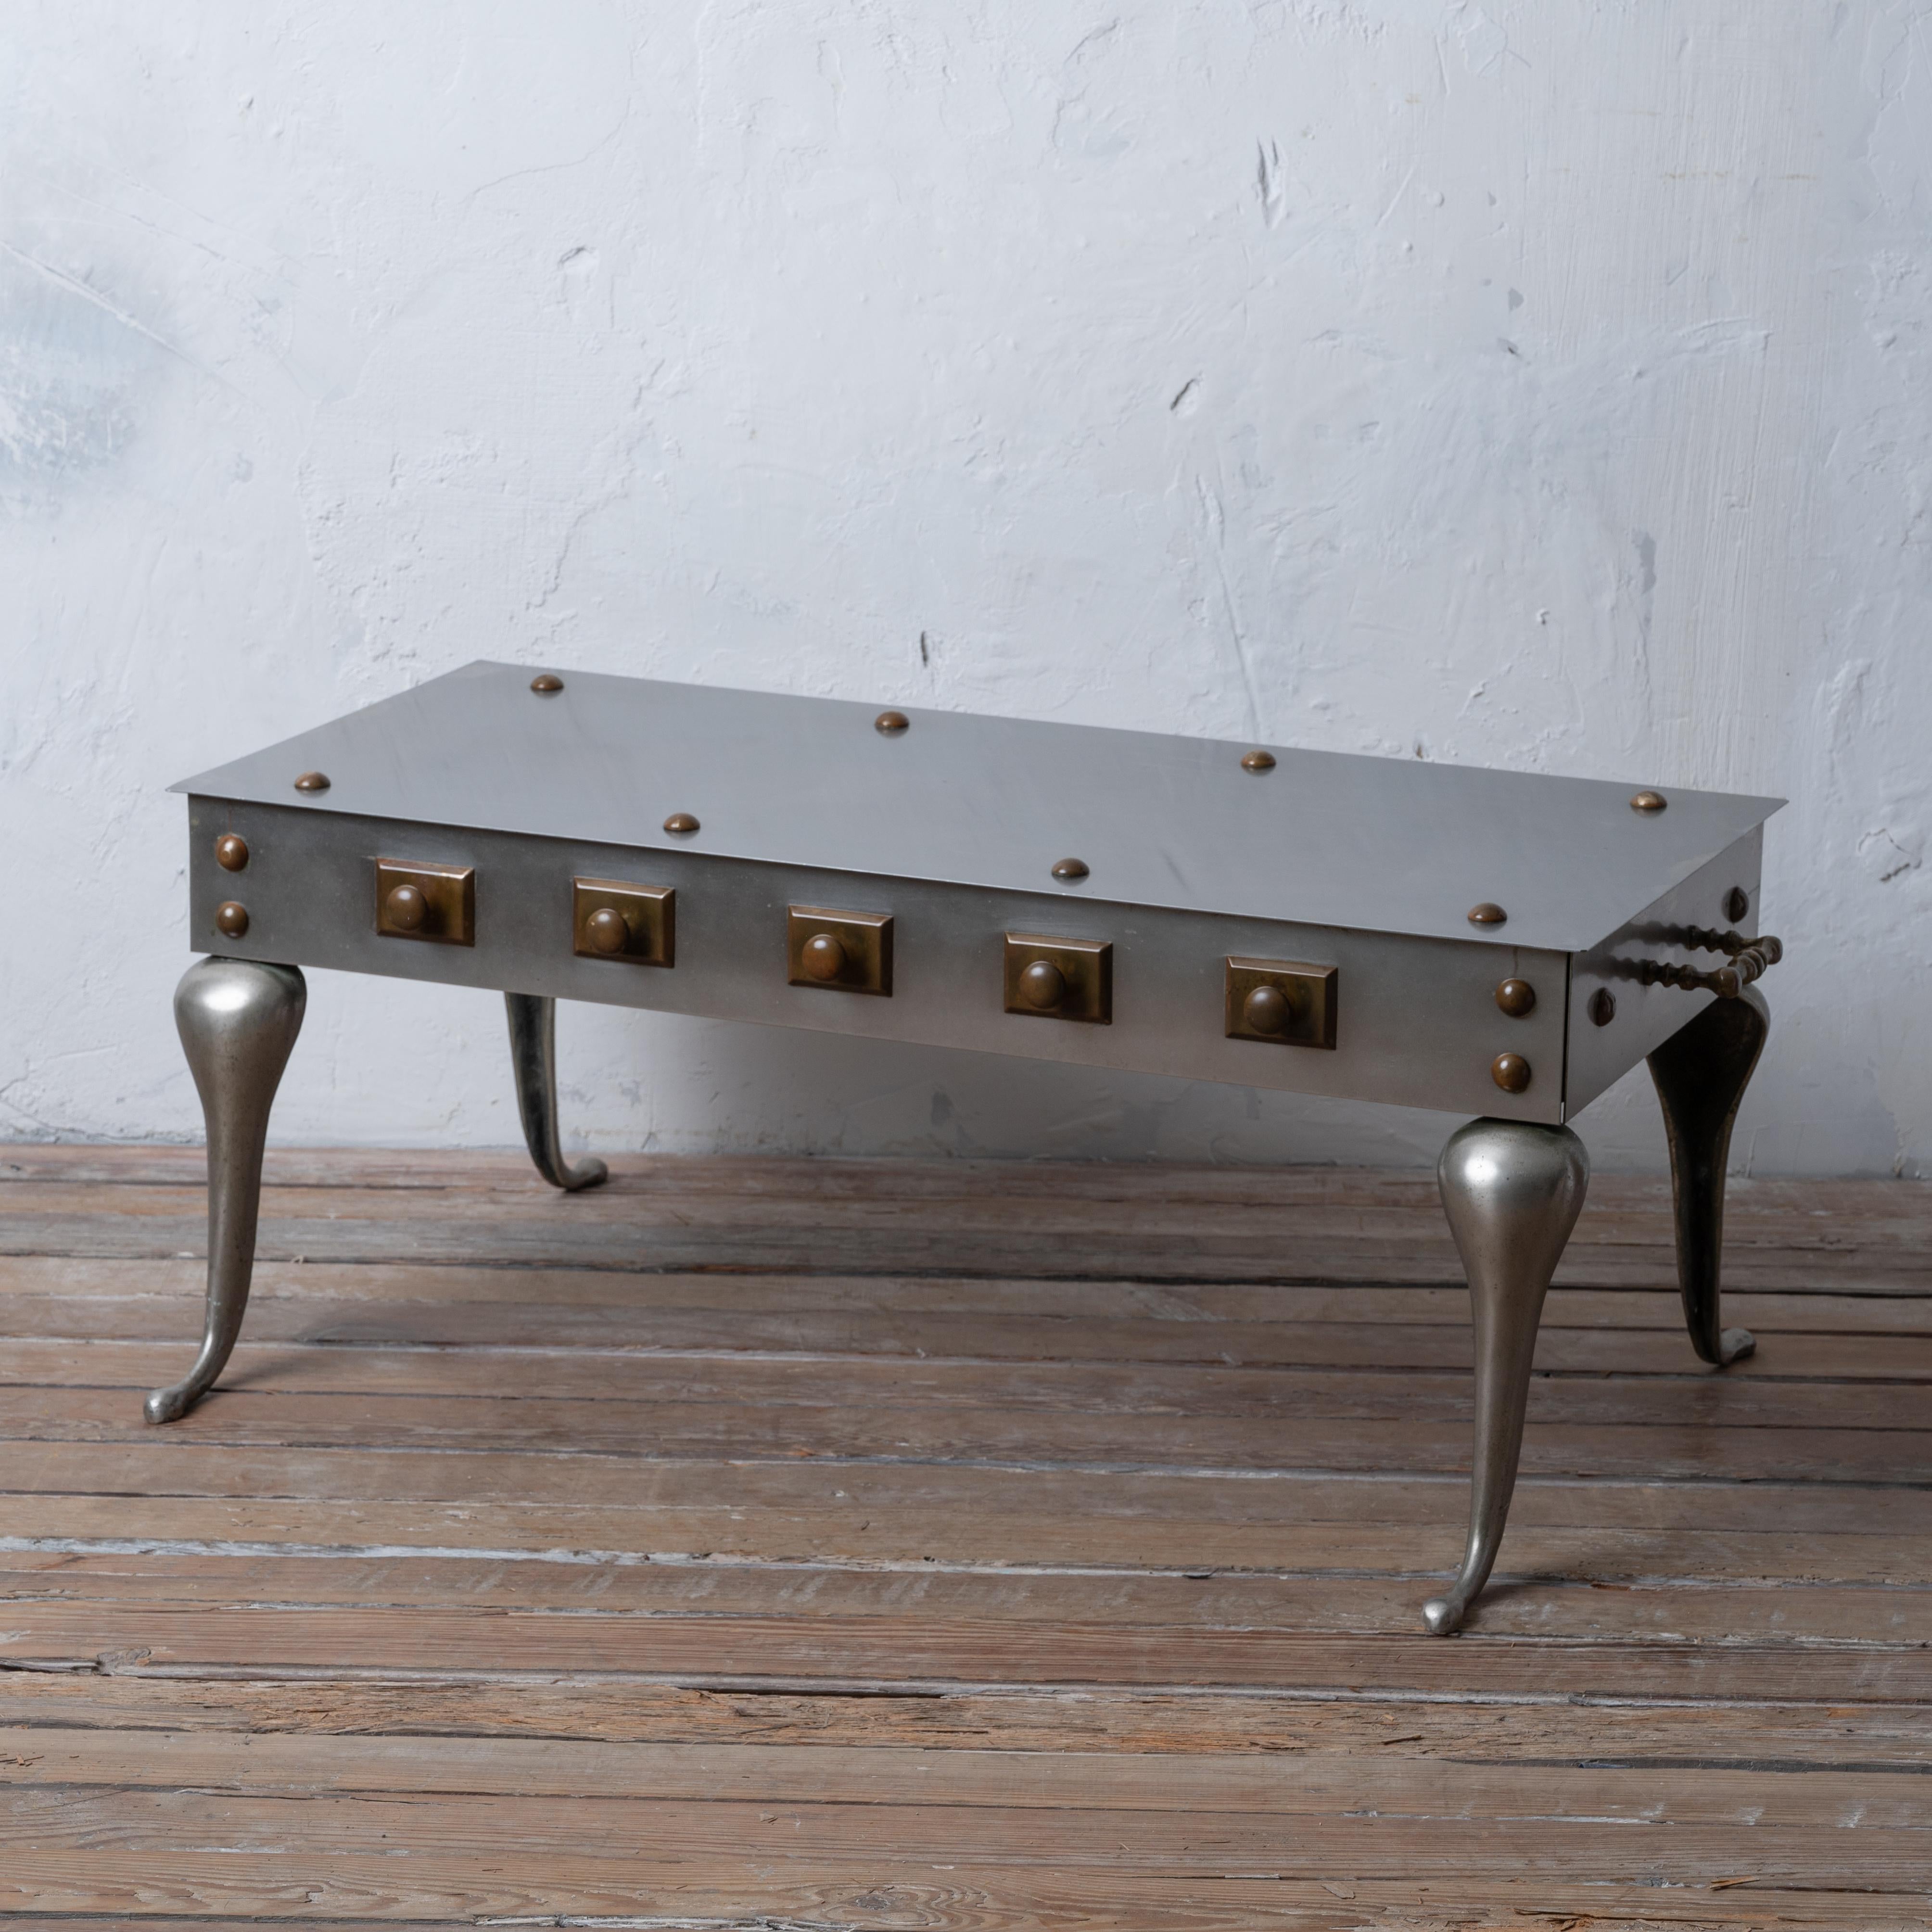 A stainless steel and bronze coffee table made in the manner of a fireplace footman stool, mid-20th century.

surface measures 36 inches wide by 16 inches deep; 15 inches tall

